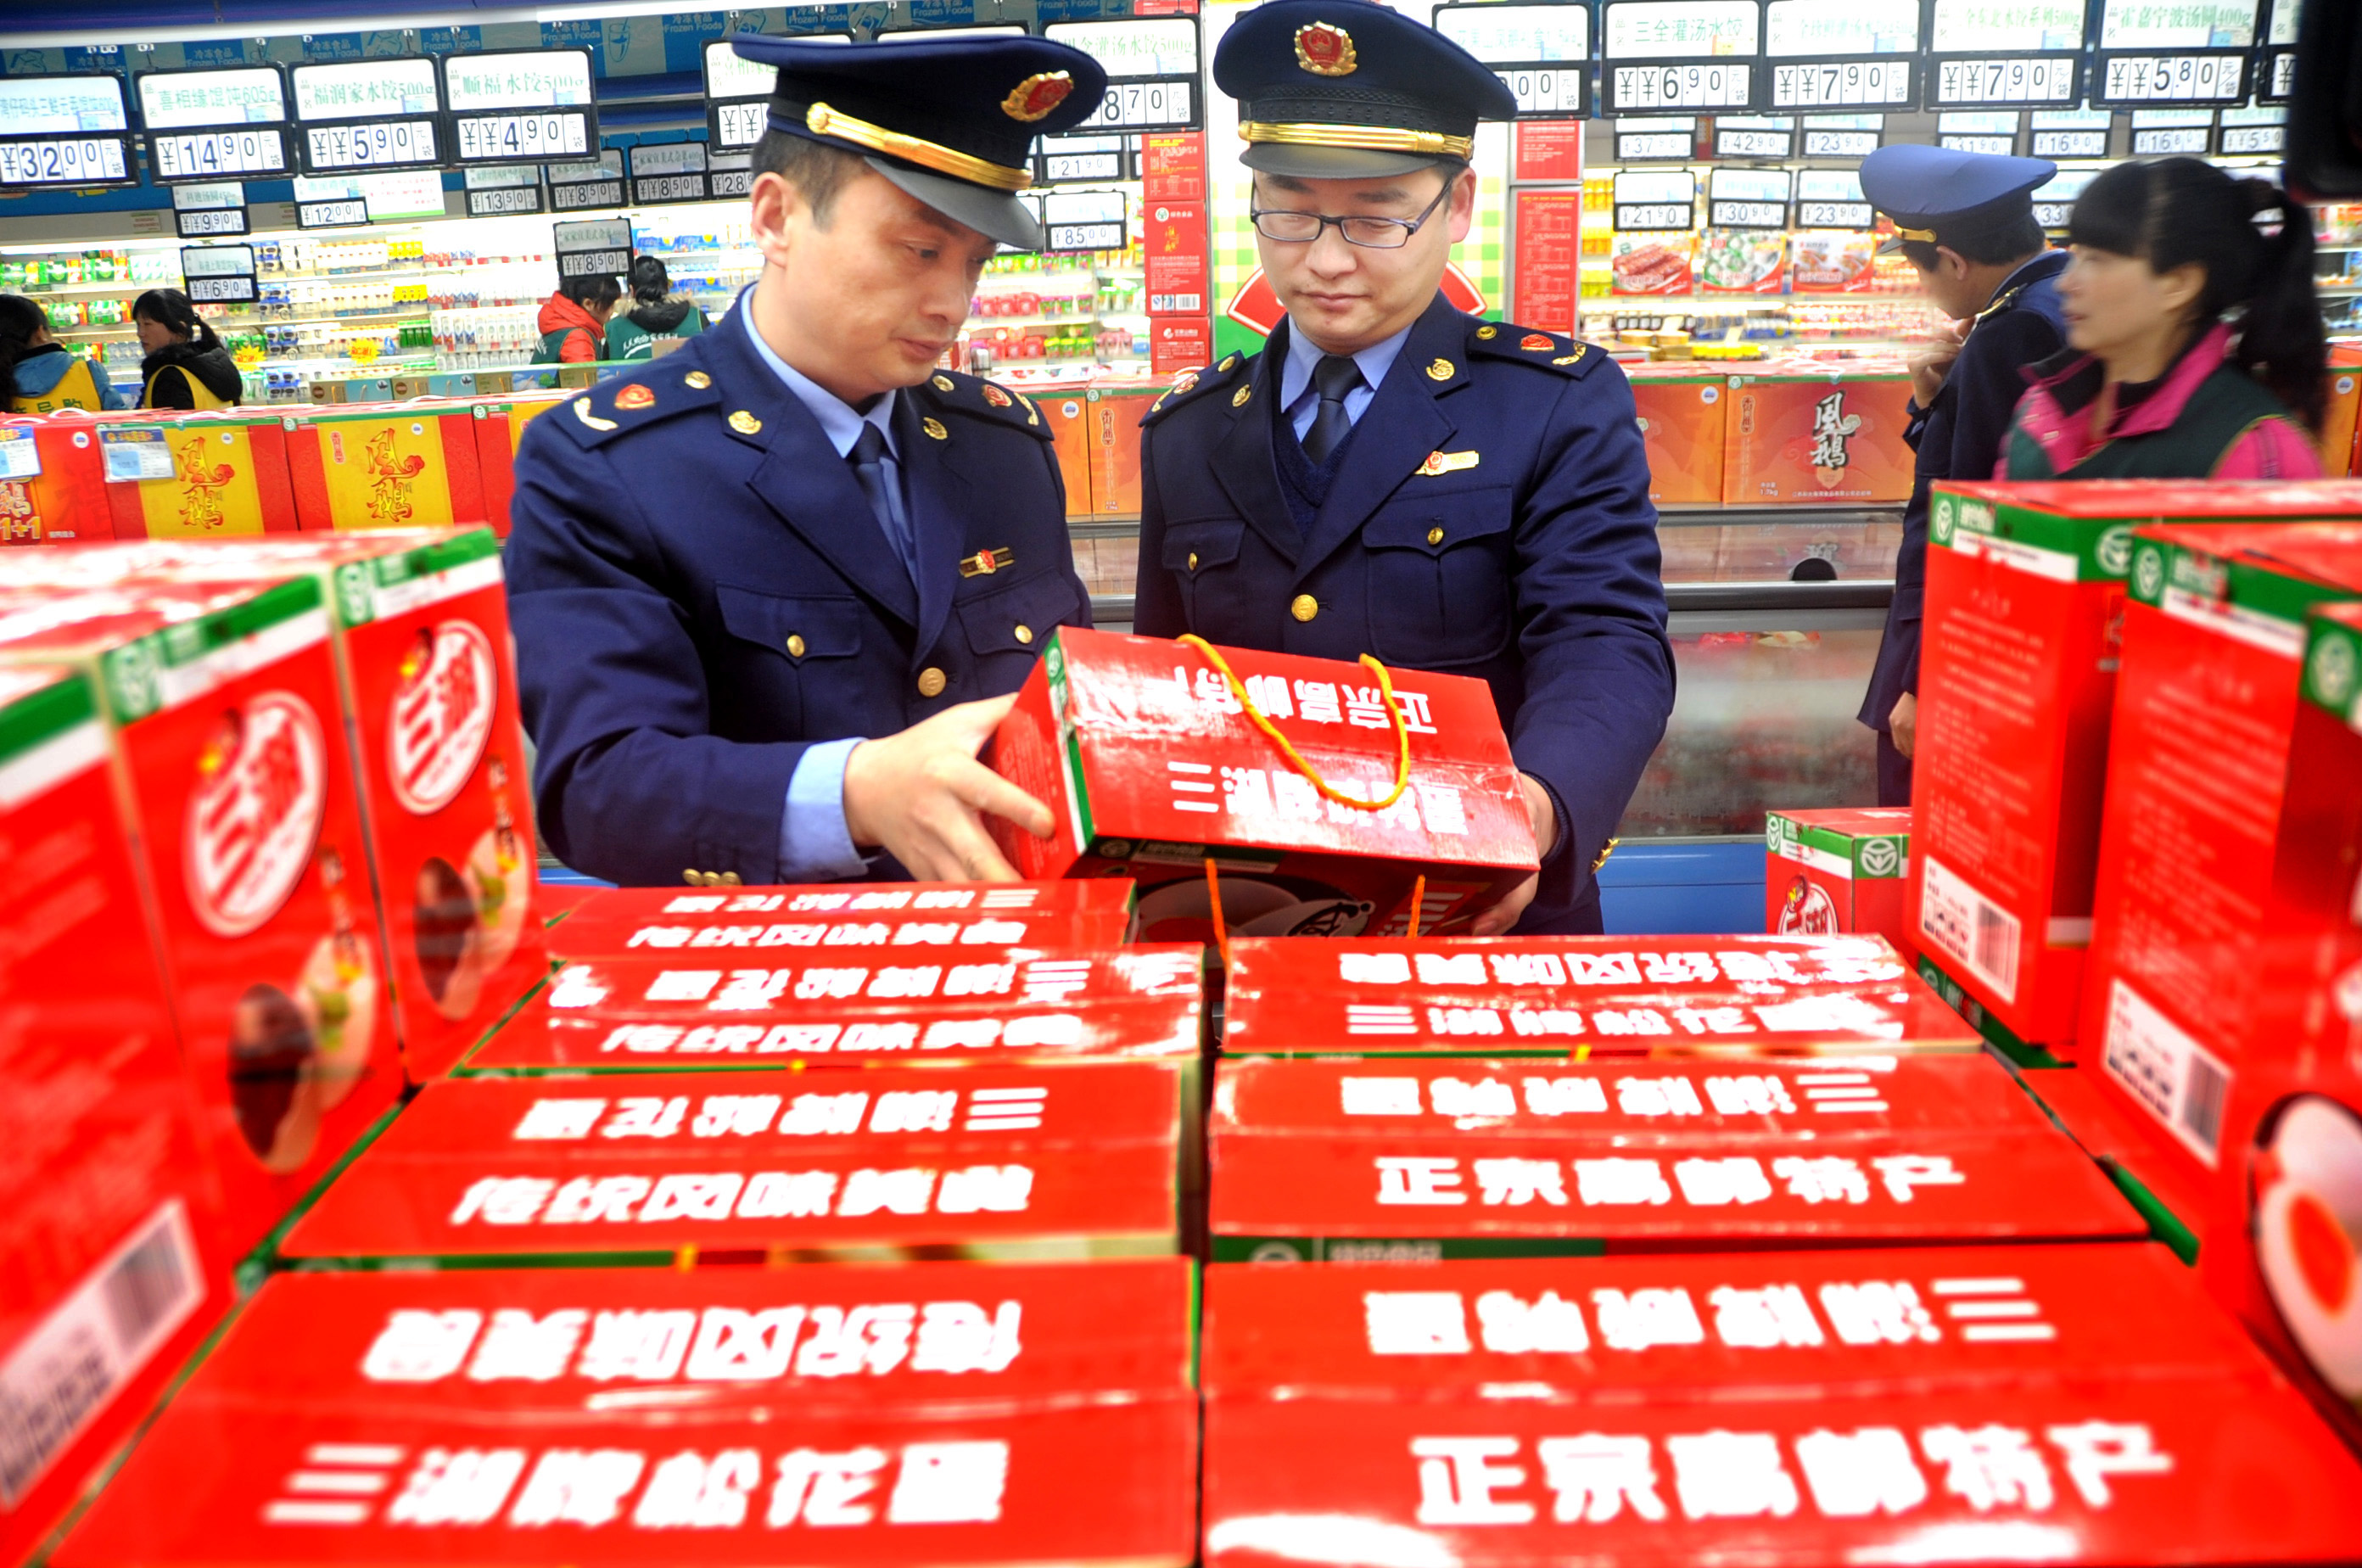 Staff members of the commerce and industry bureau check the quality information of food in a supermarket ahead of the World Consumer Rights Day in Lianyungang, east China's Jiangsu Province. Photo: Xinhua